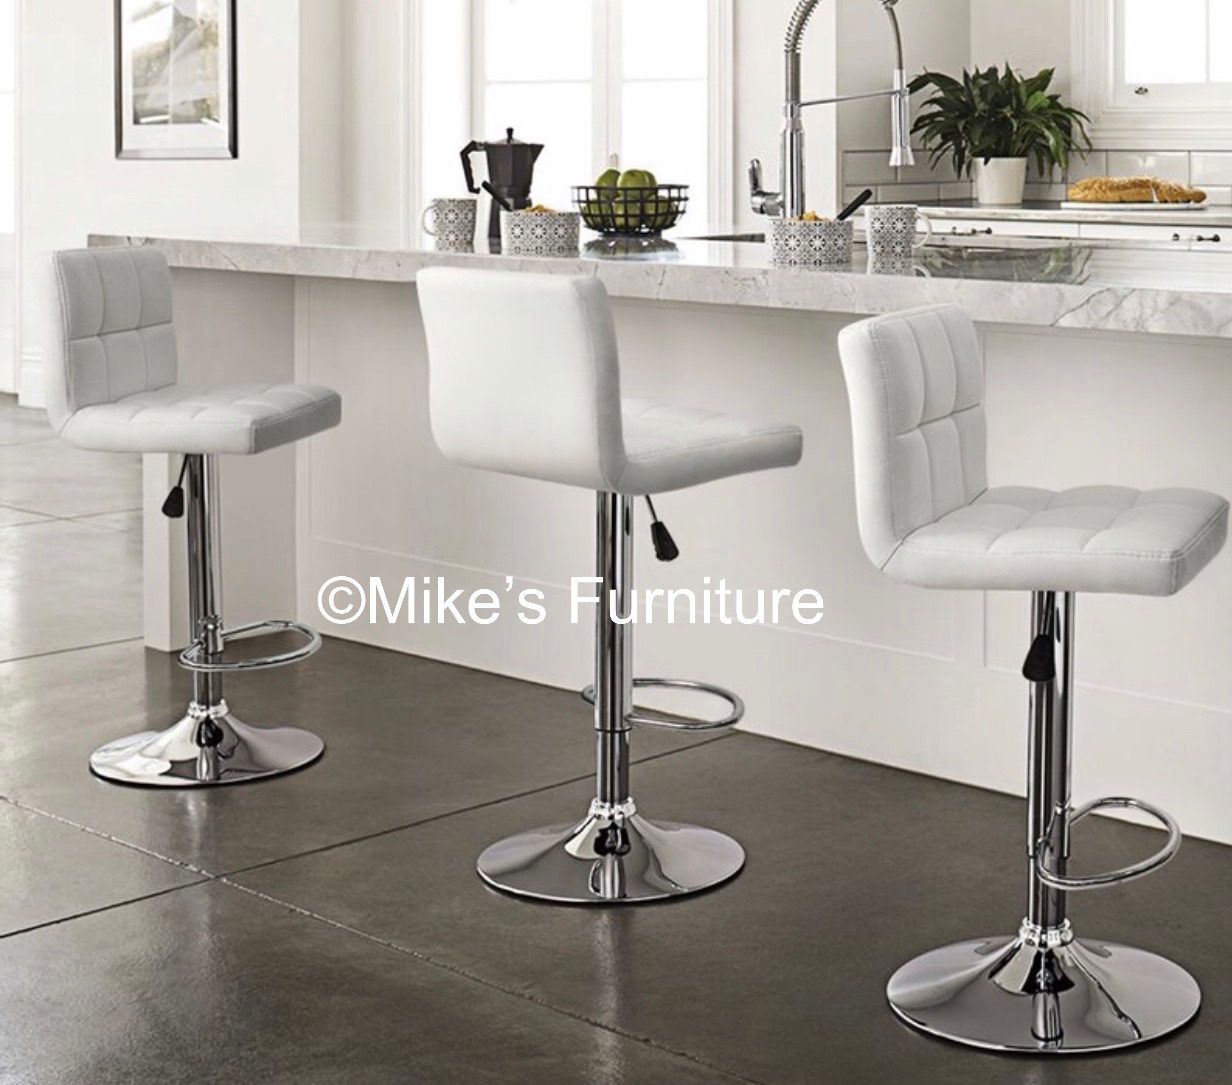 New Adjustable household Bar Stools (5 colors Red, Black, White, Gray, Brown)